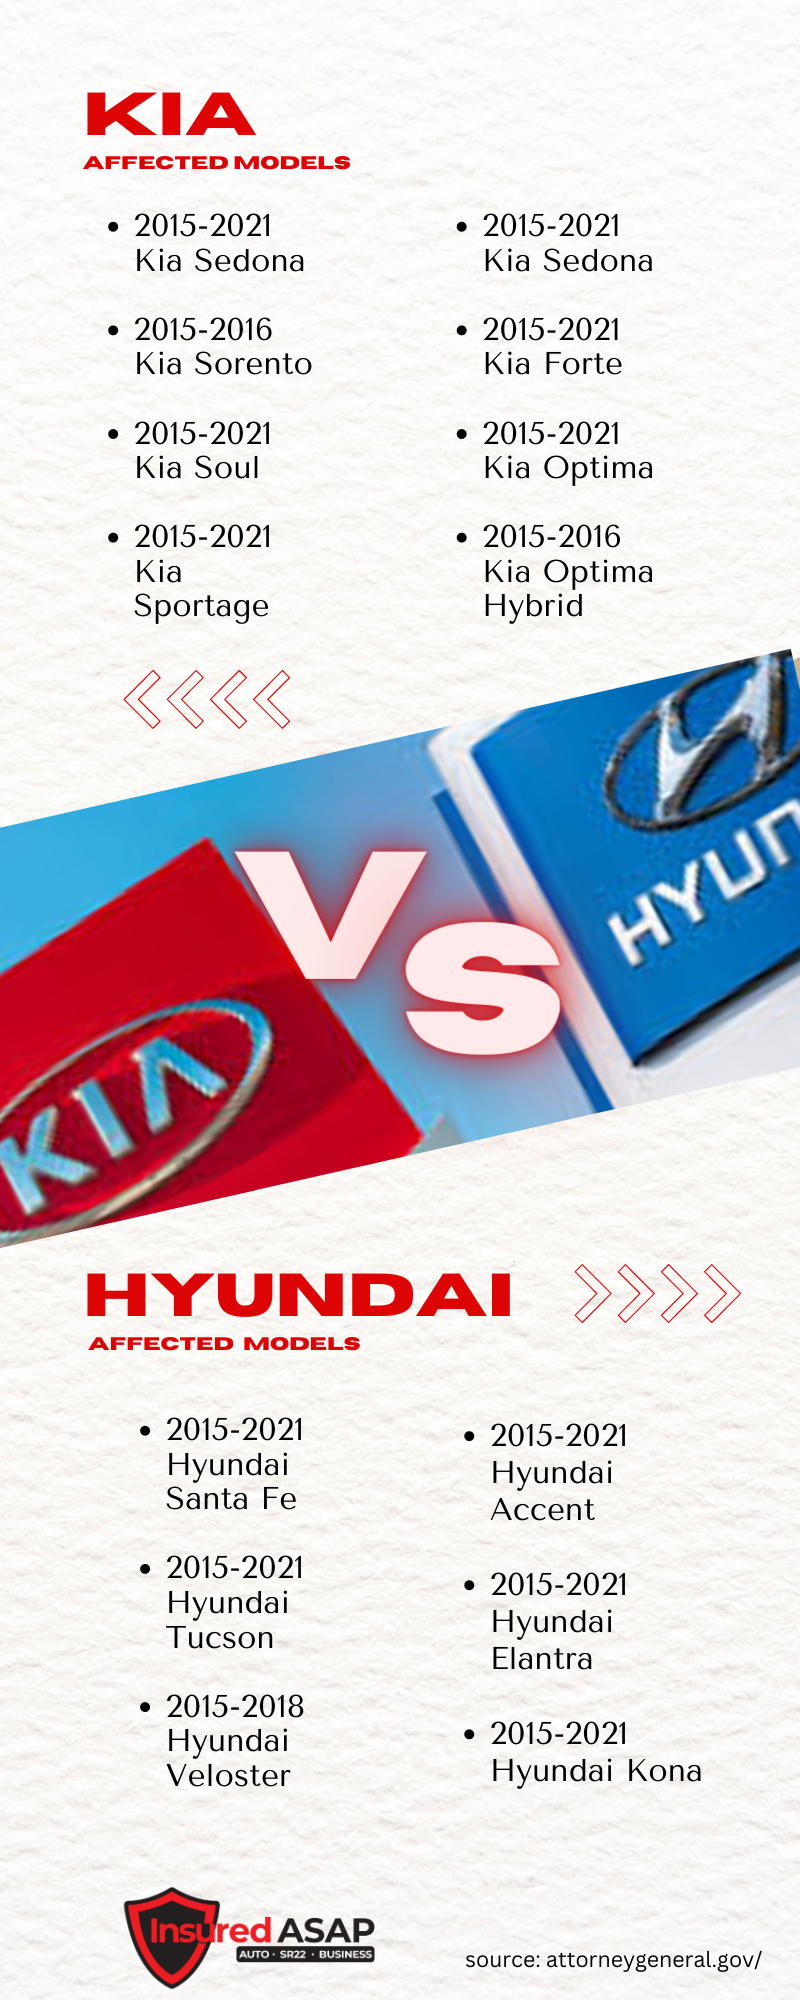 List of Kia and Hyundai car models that have high insurance prices due to their susceptibility to theft.